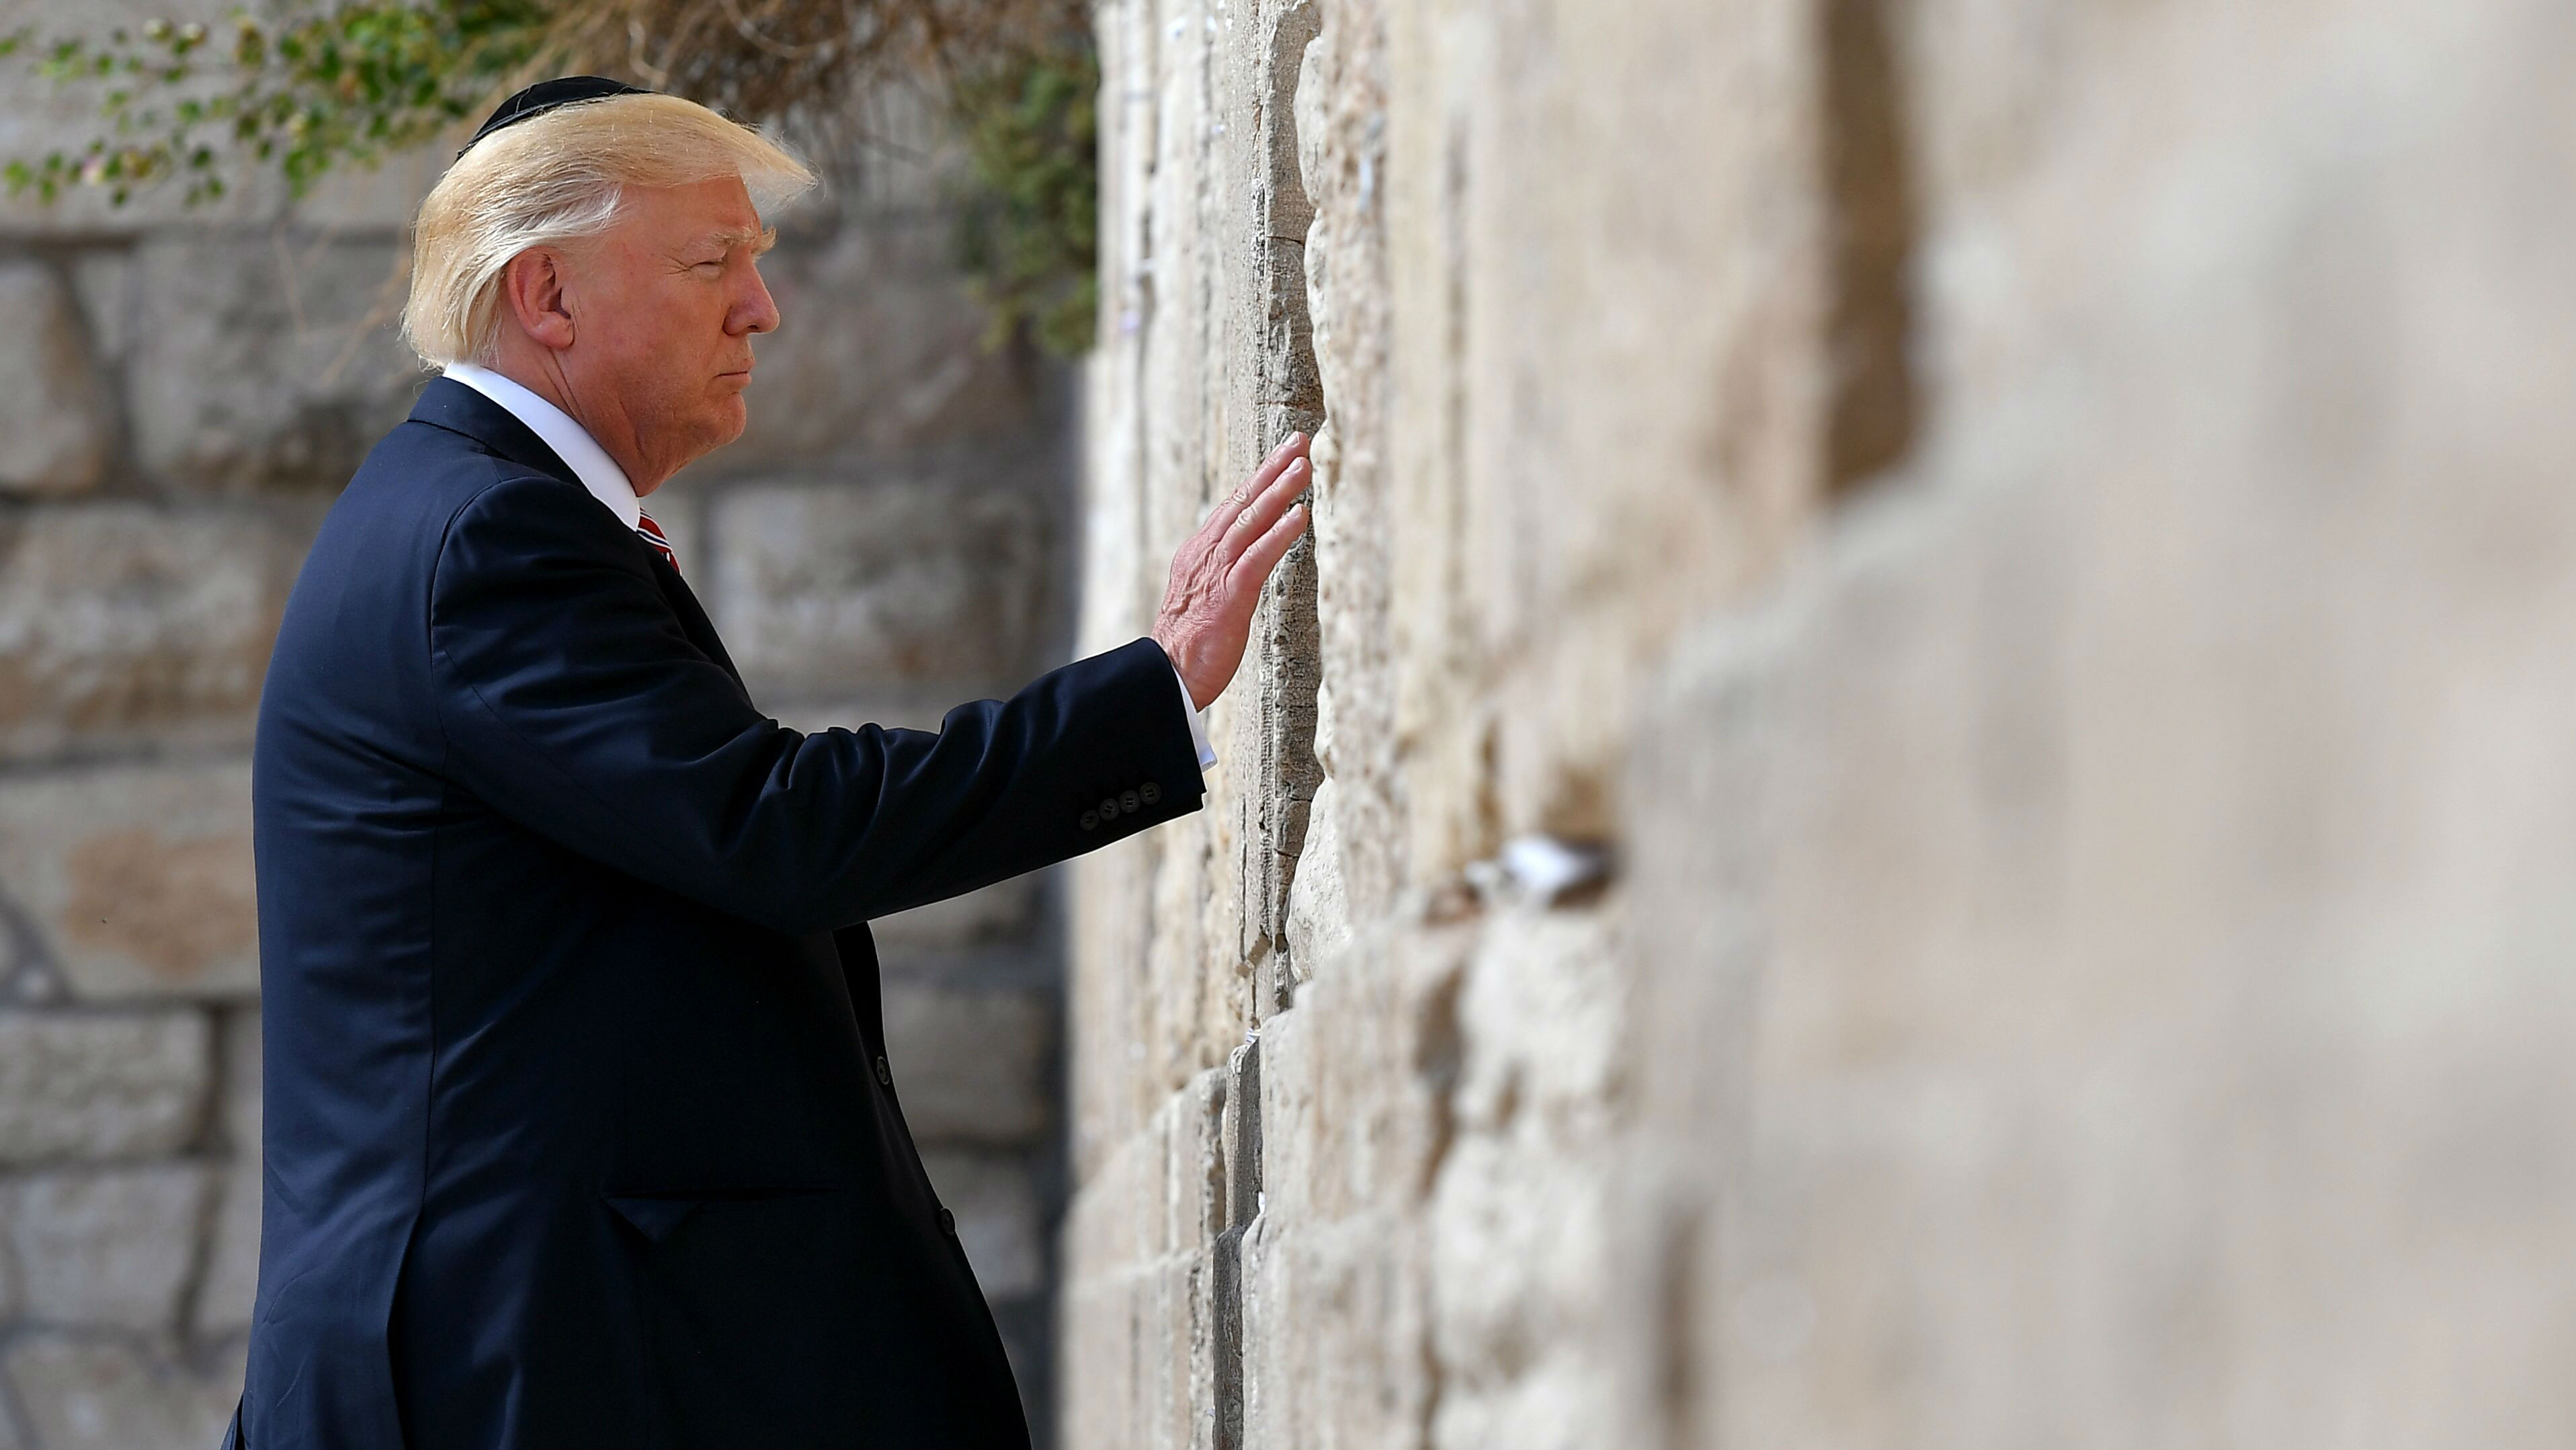 Trump touches Western Wall